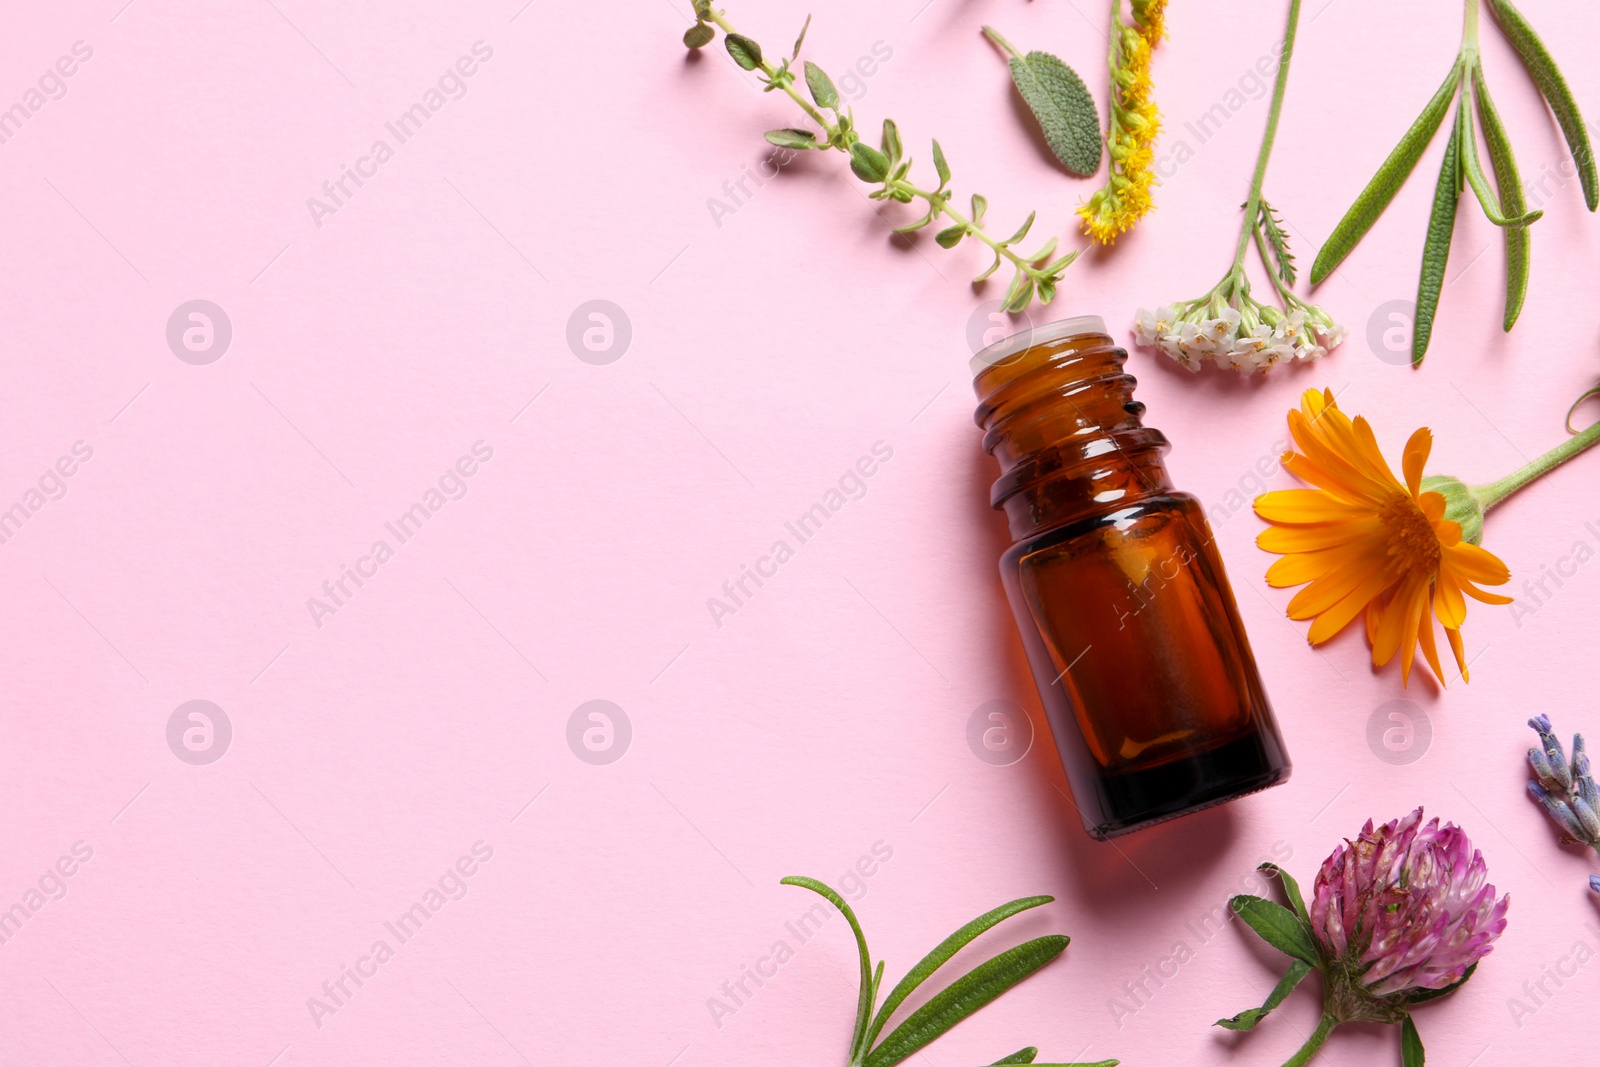 Photo of Bottle of essential oil, different herbs and flowers on pink background, flat lay. Space for text